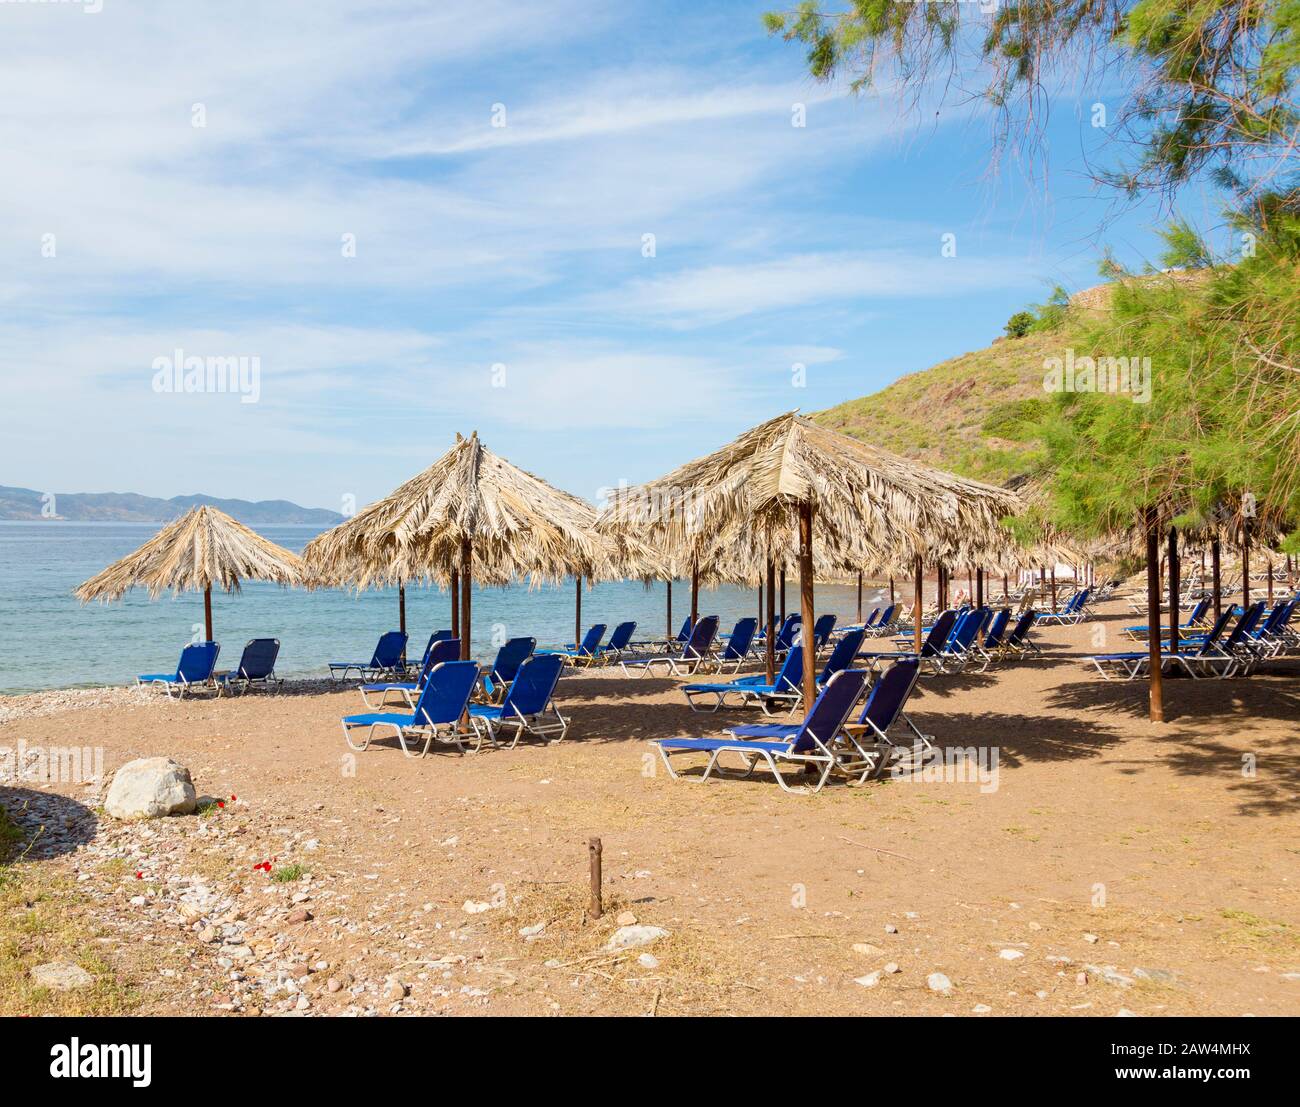 Vlichos beach scene on Hydra Island, Greece with lounge chairs and palapas. Stock Photo